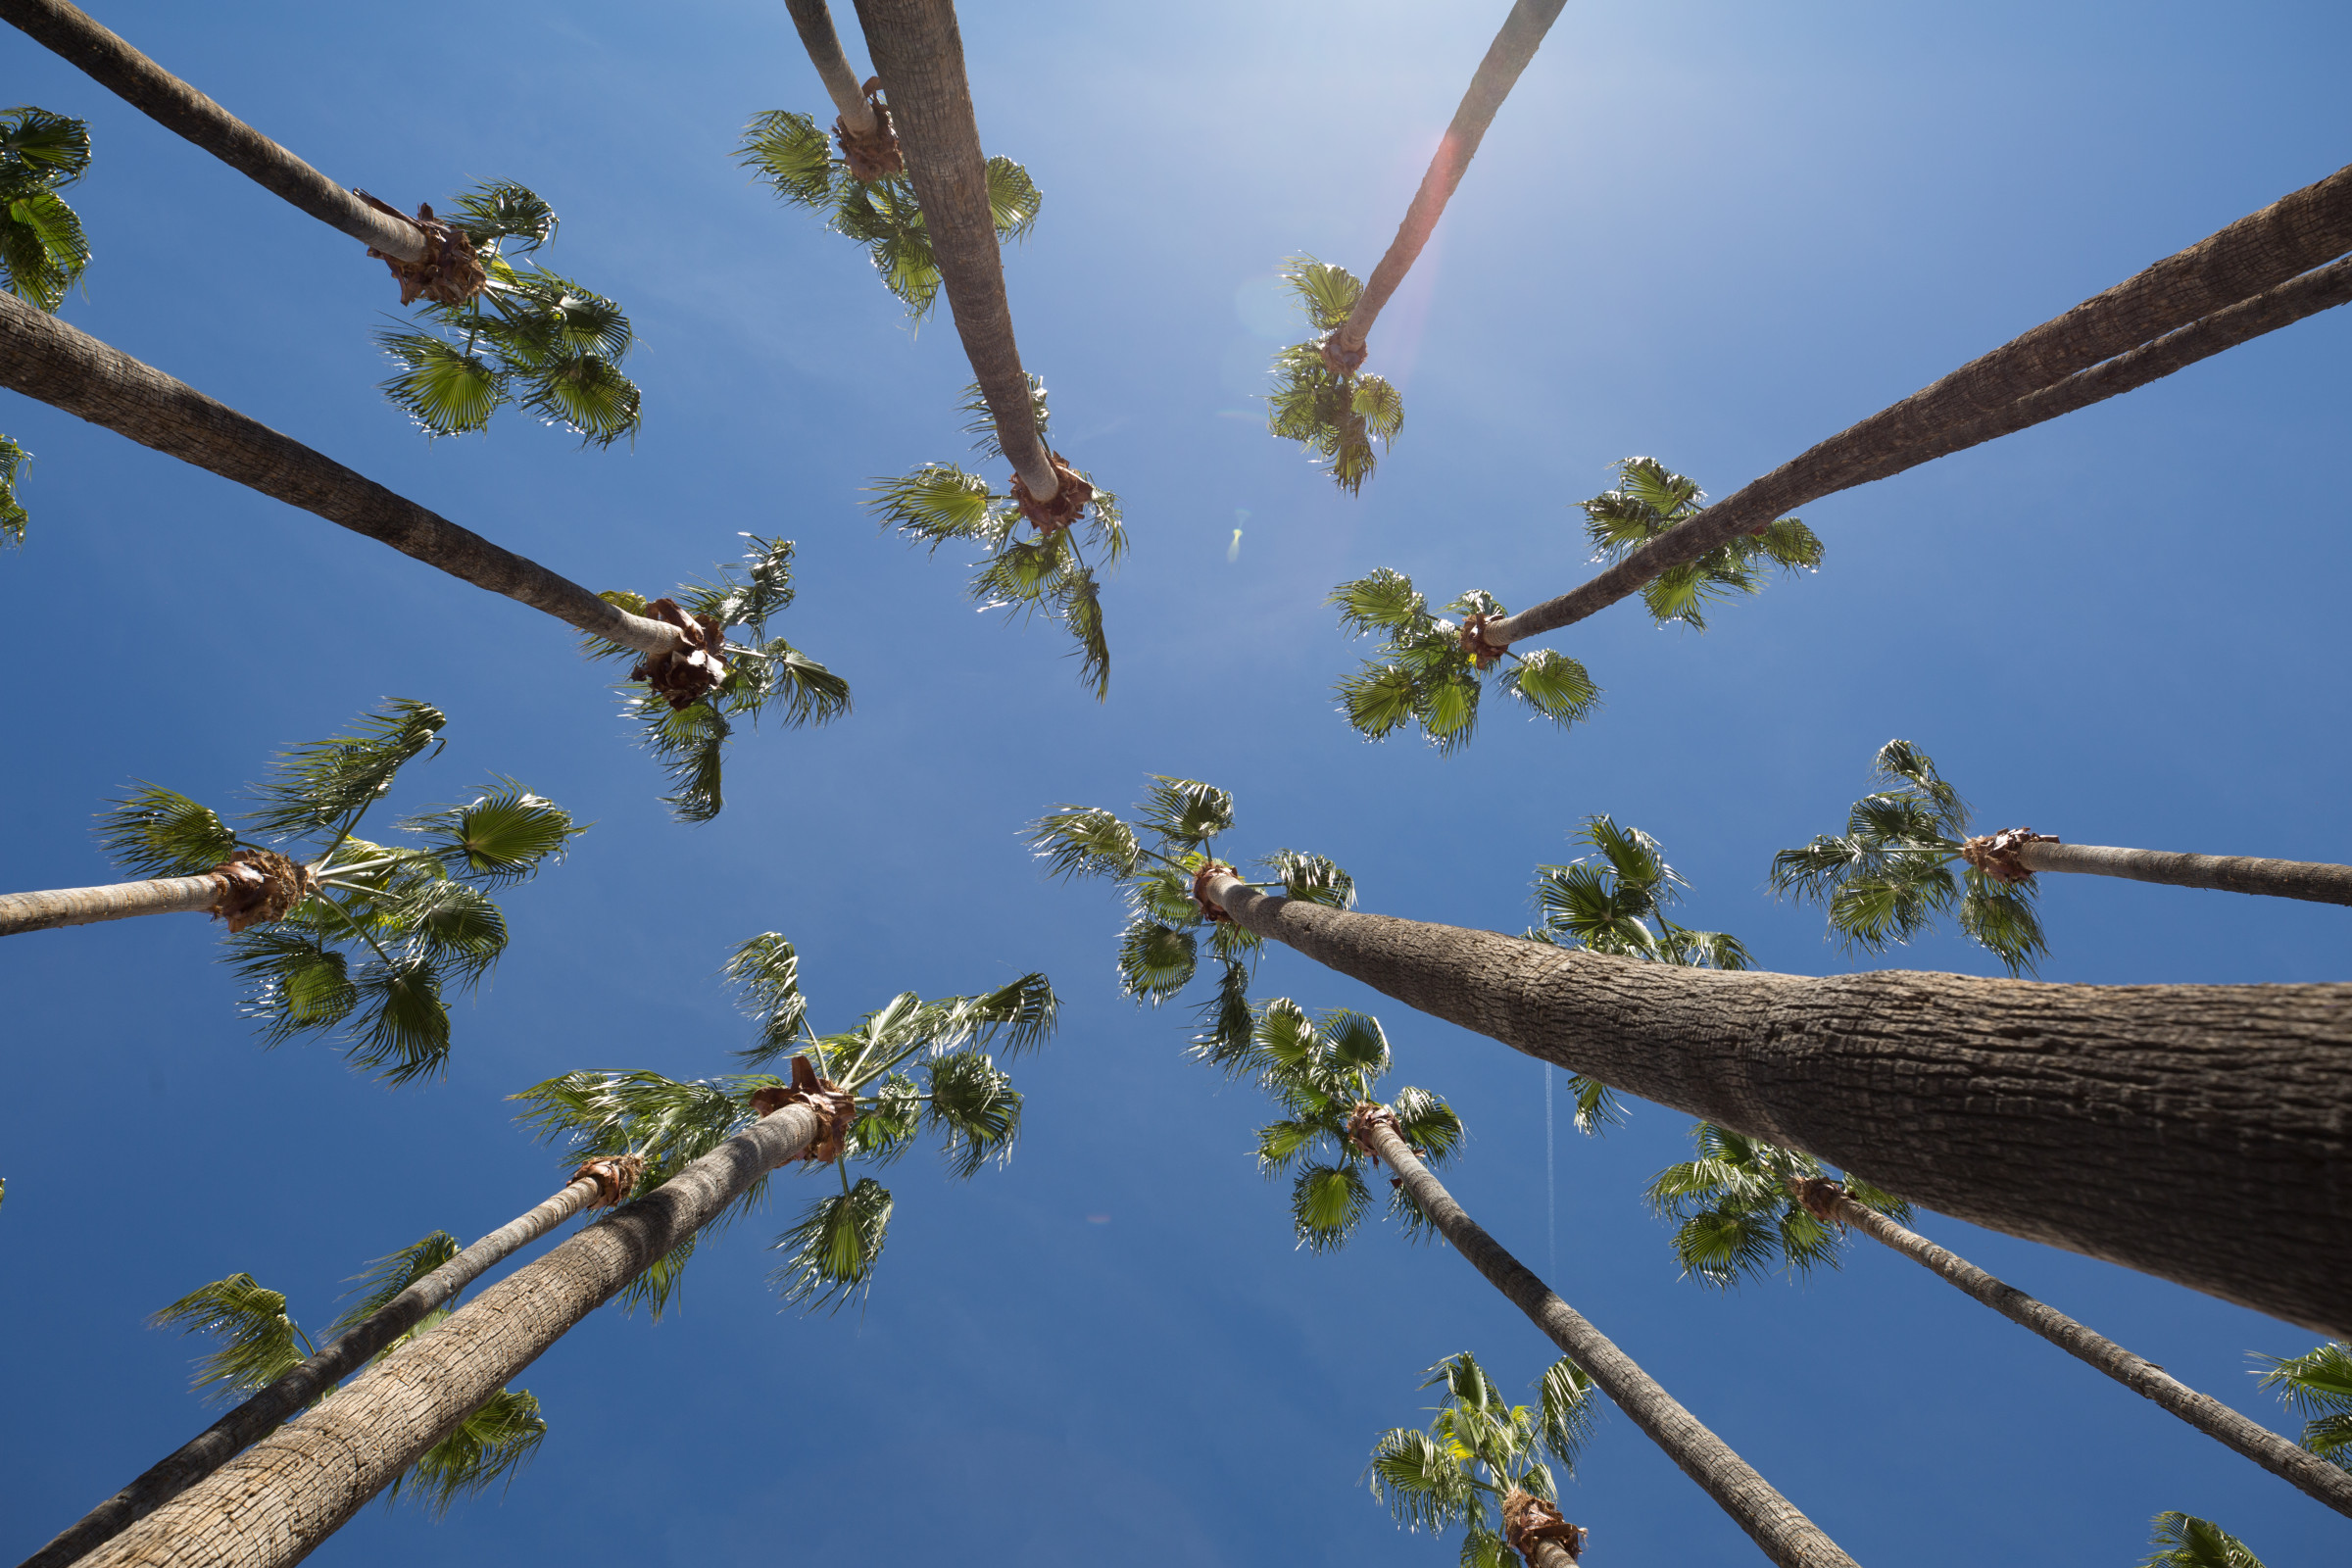 View of palm trees from below.